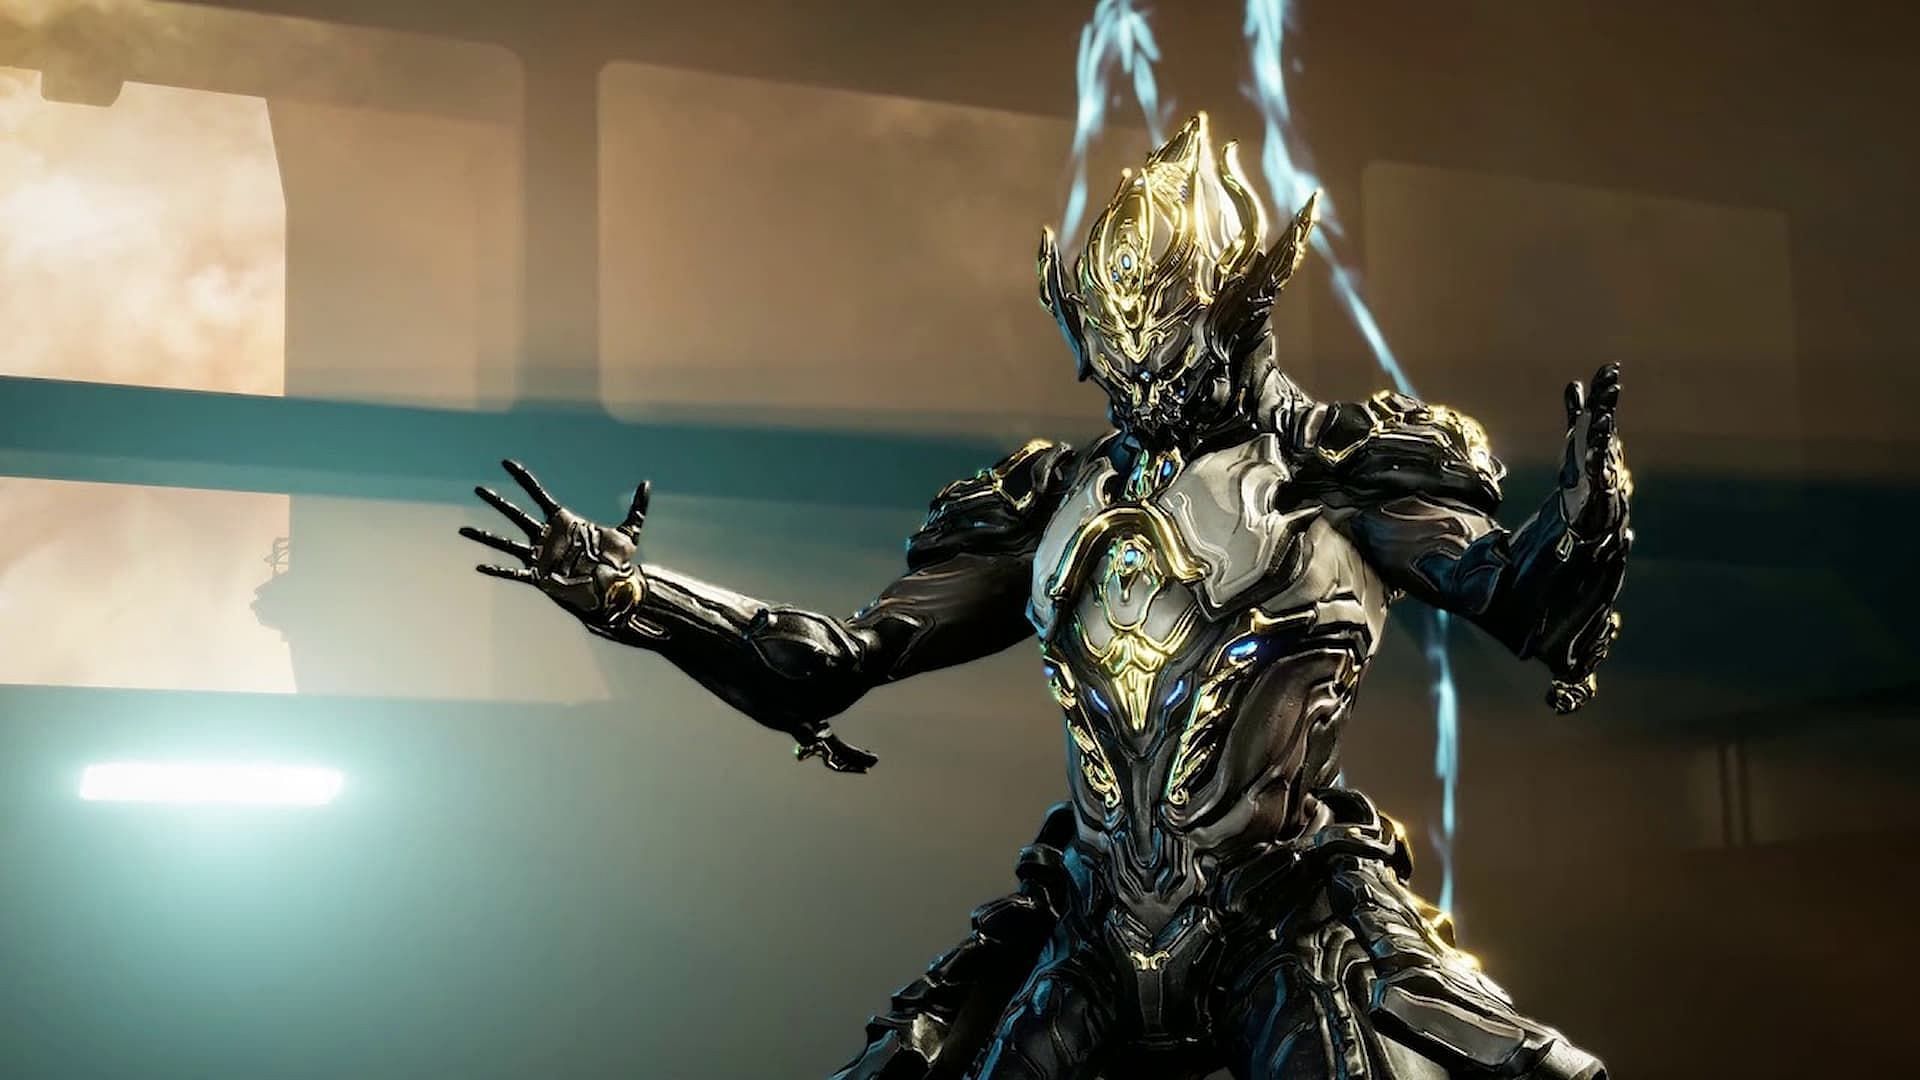 Wukong Prime was released in 2019 to record-breaking Prime Access purchases (Image via Digital Extremes)